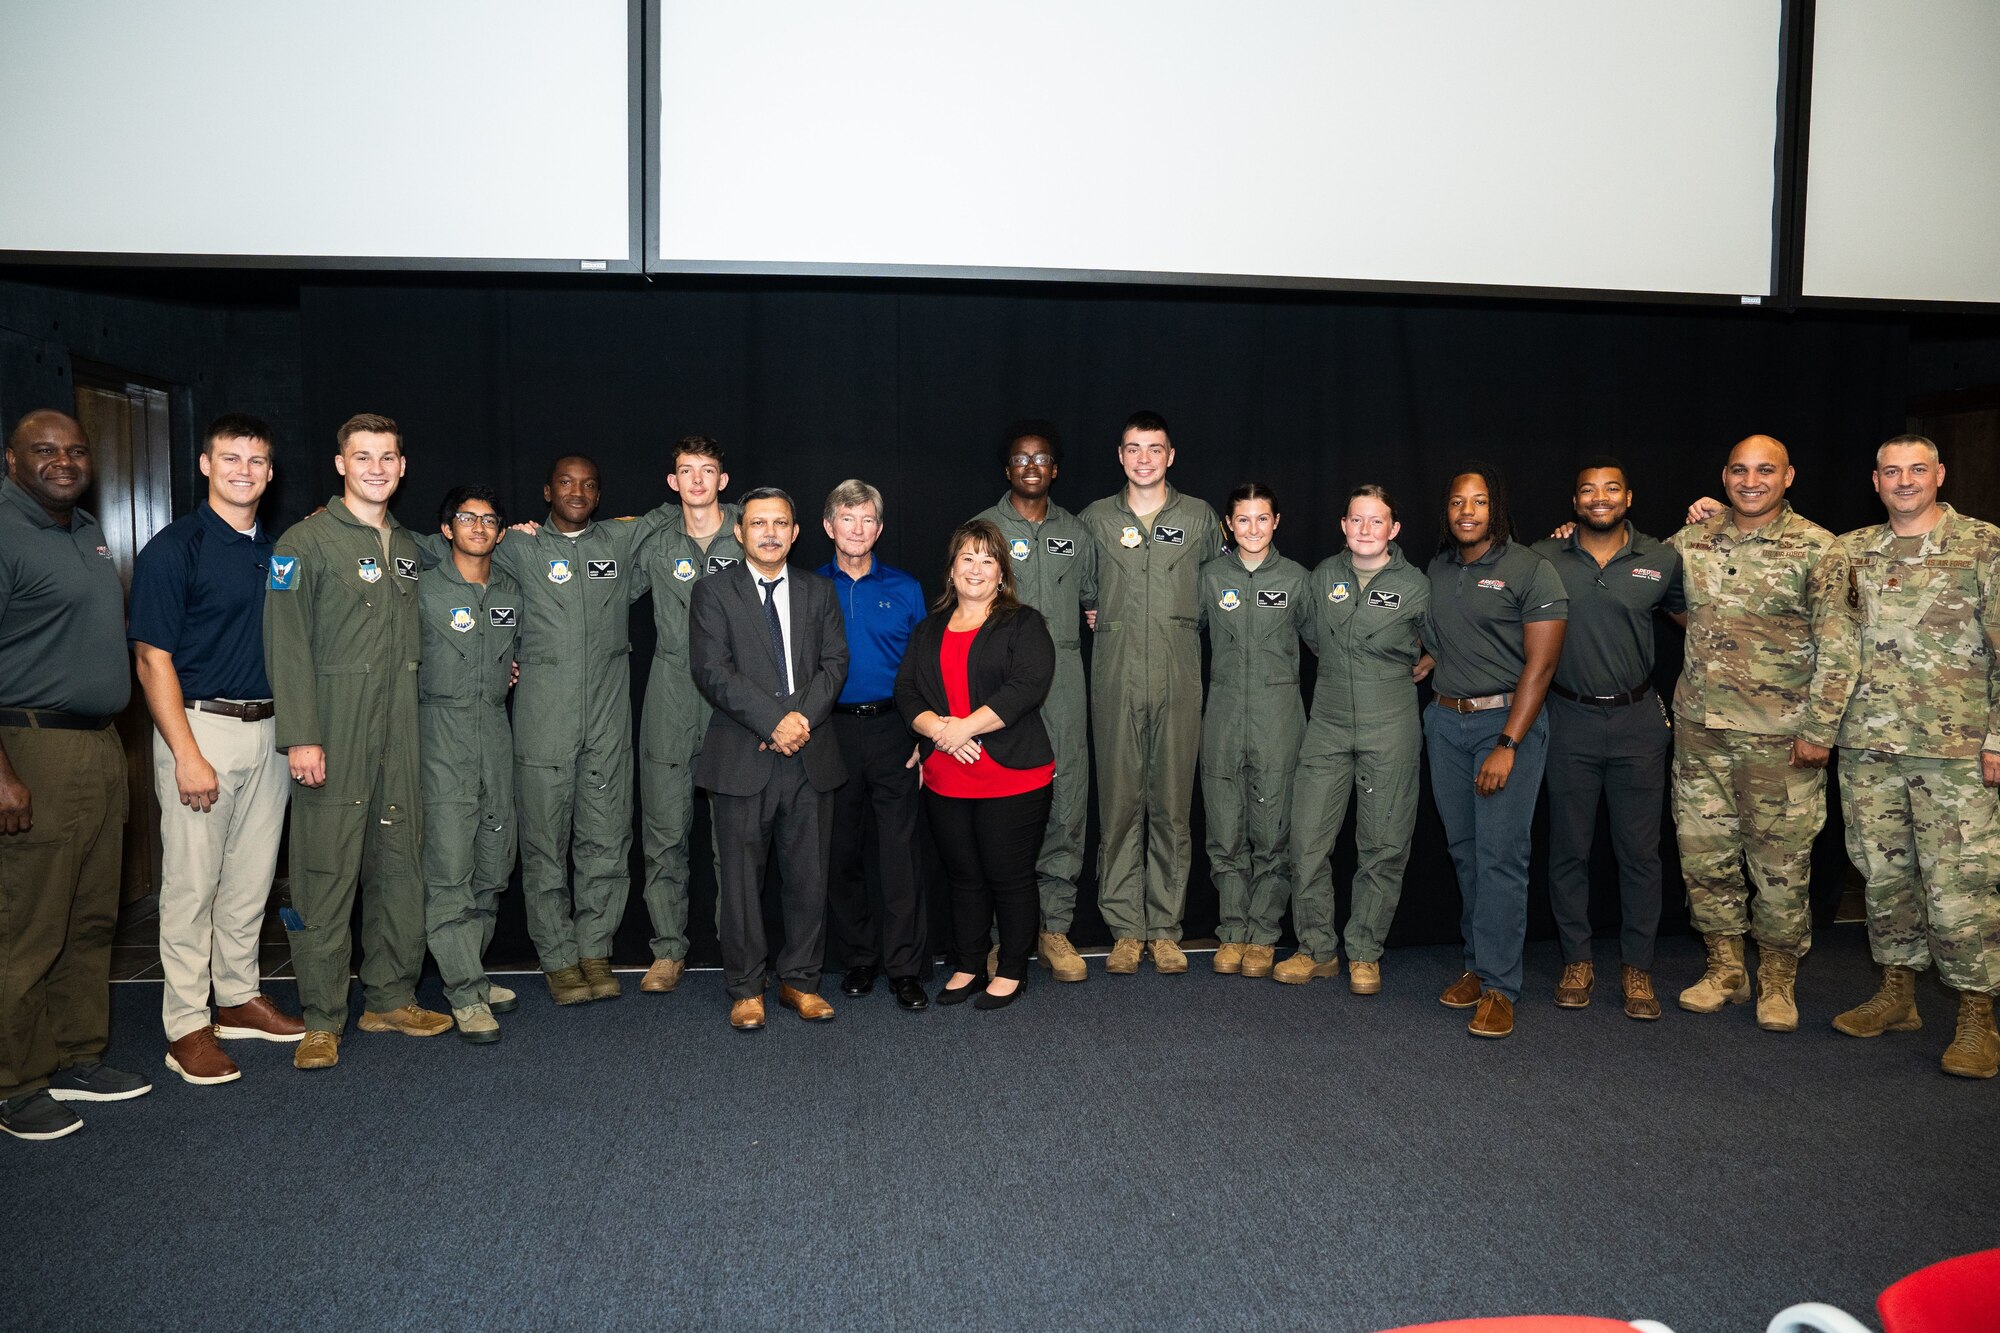 The AFJROTC Flight Academy graduates take a celebratory photo with AFJROTC staff, Detachment 015 cadre, faculty, and Red Tail Flight Academy flight instructor team